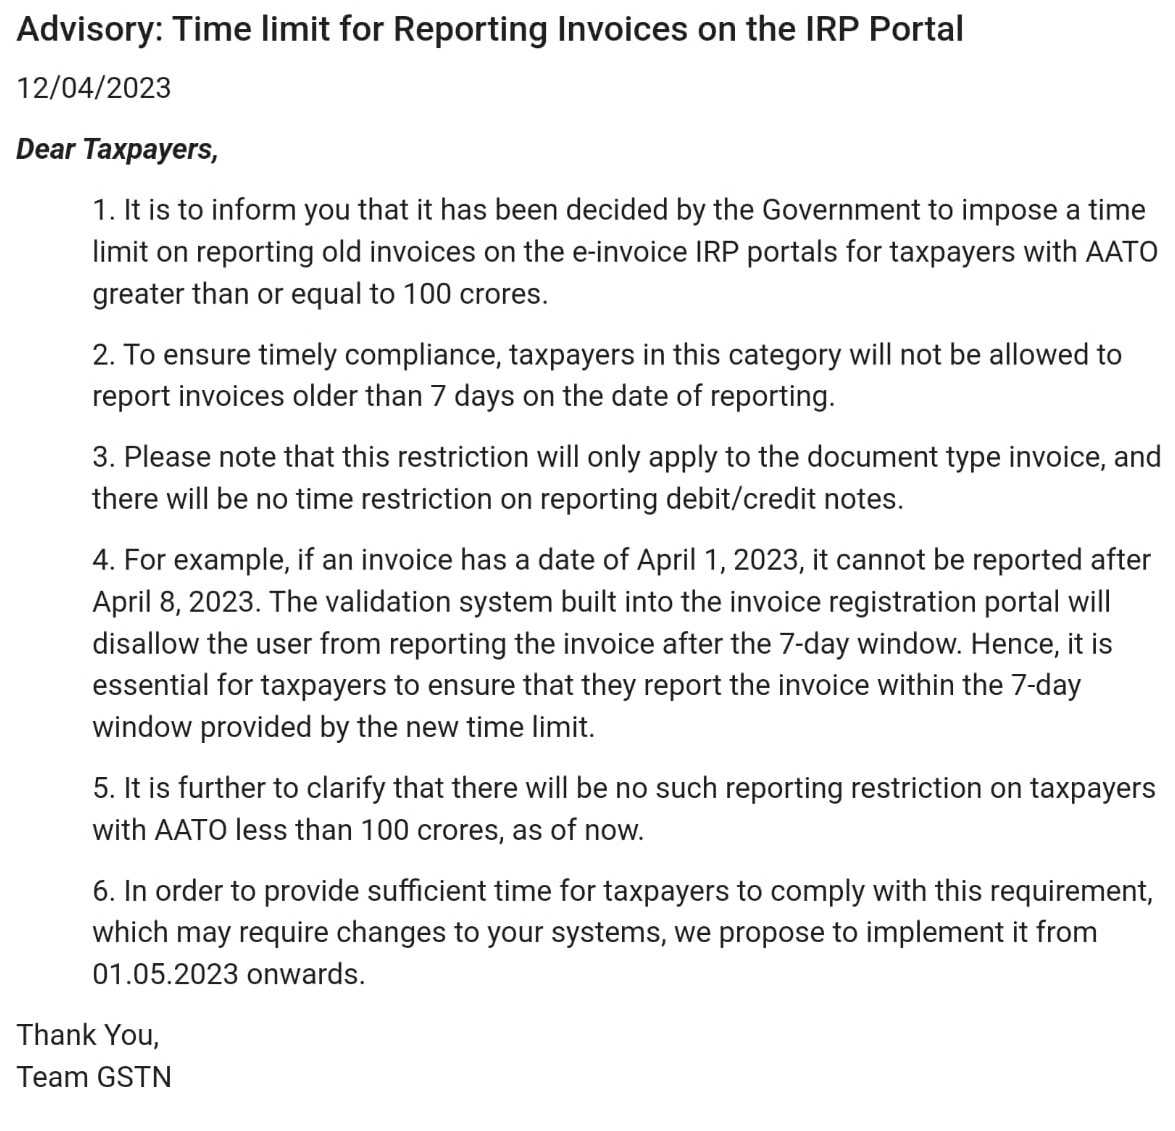 Time Limit Imposed for Invoice Reporting on IRP Portal